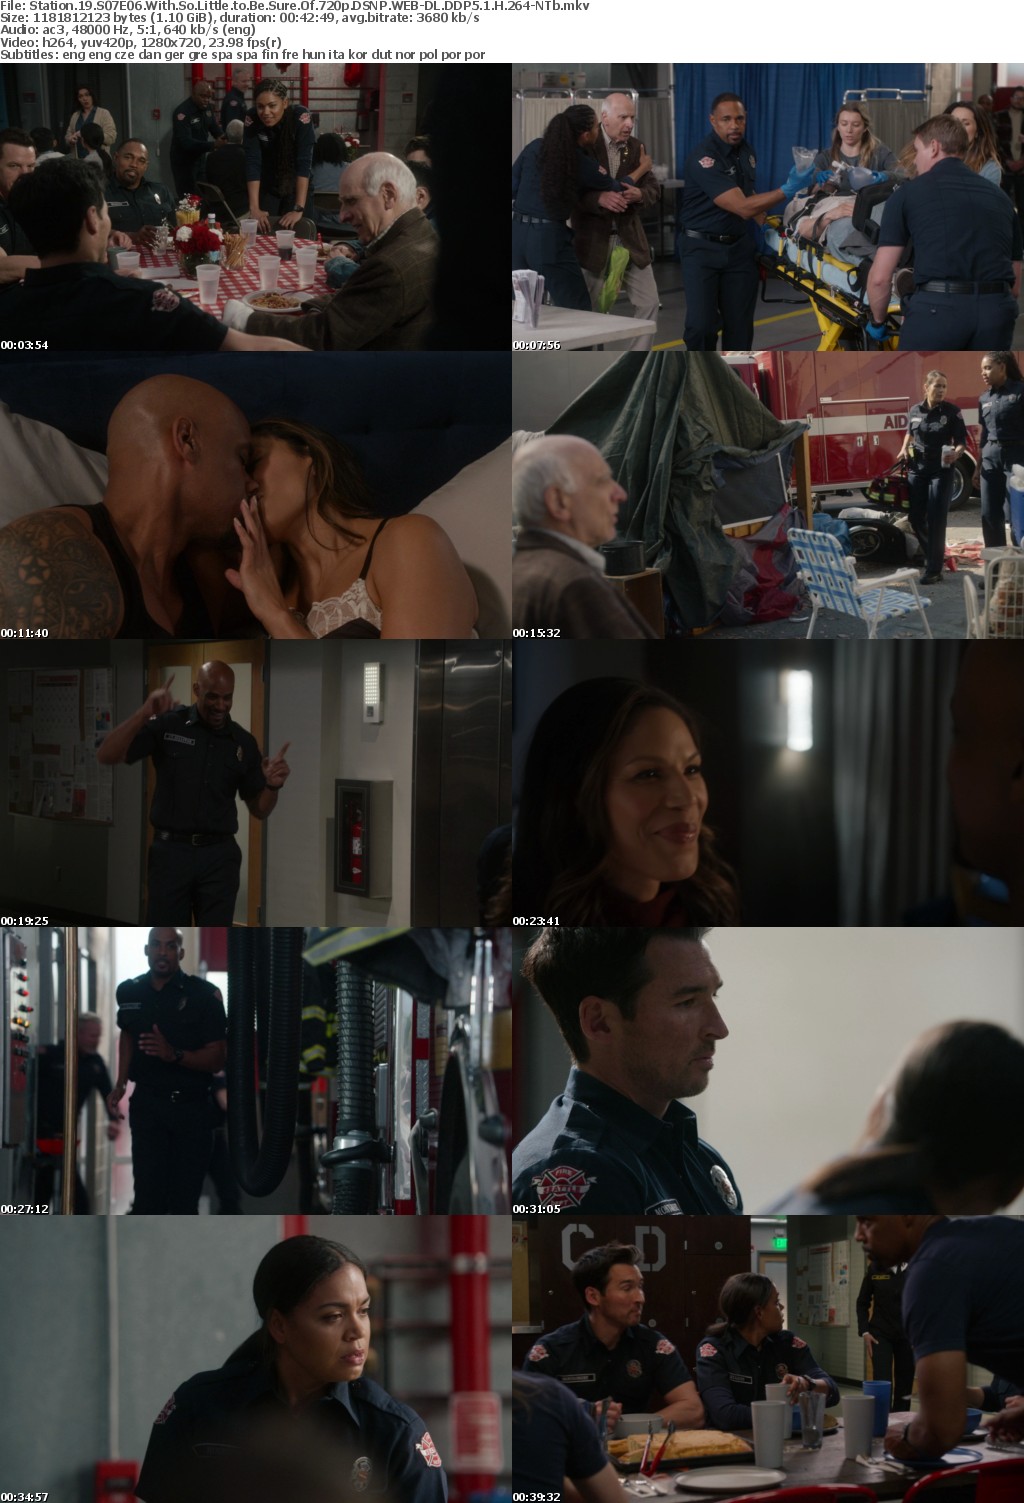 Station 19 S07E06 With So Little to Be Sure Of 720p DSNP WEB-DL DDP5 1 H 264-NTb